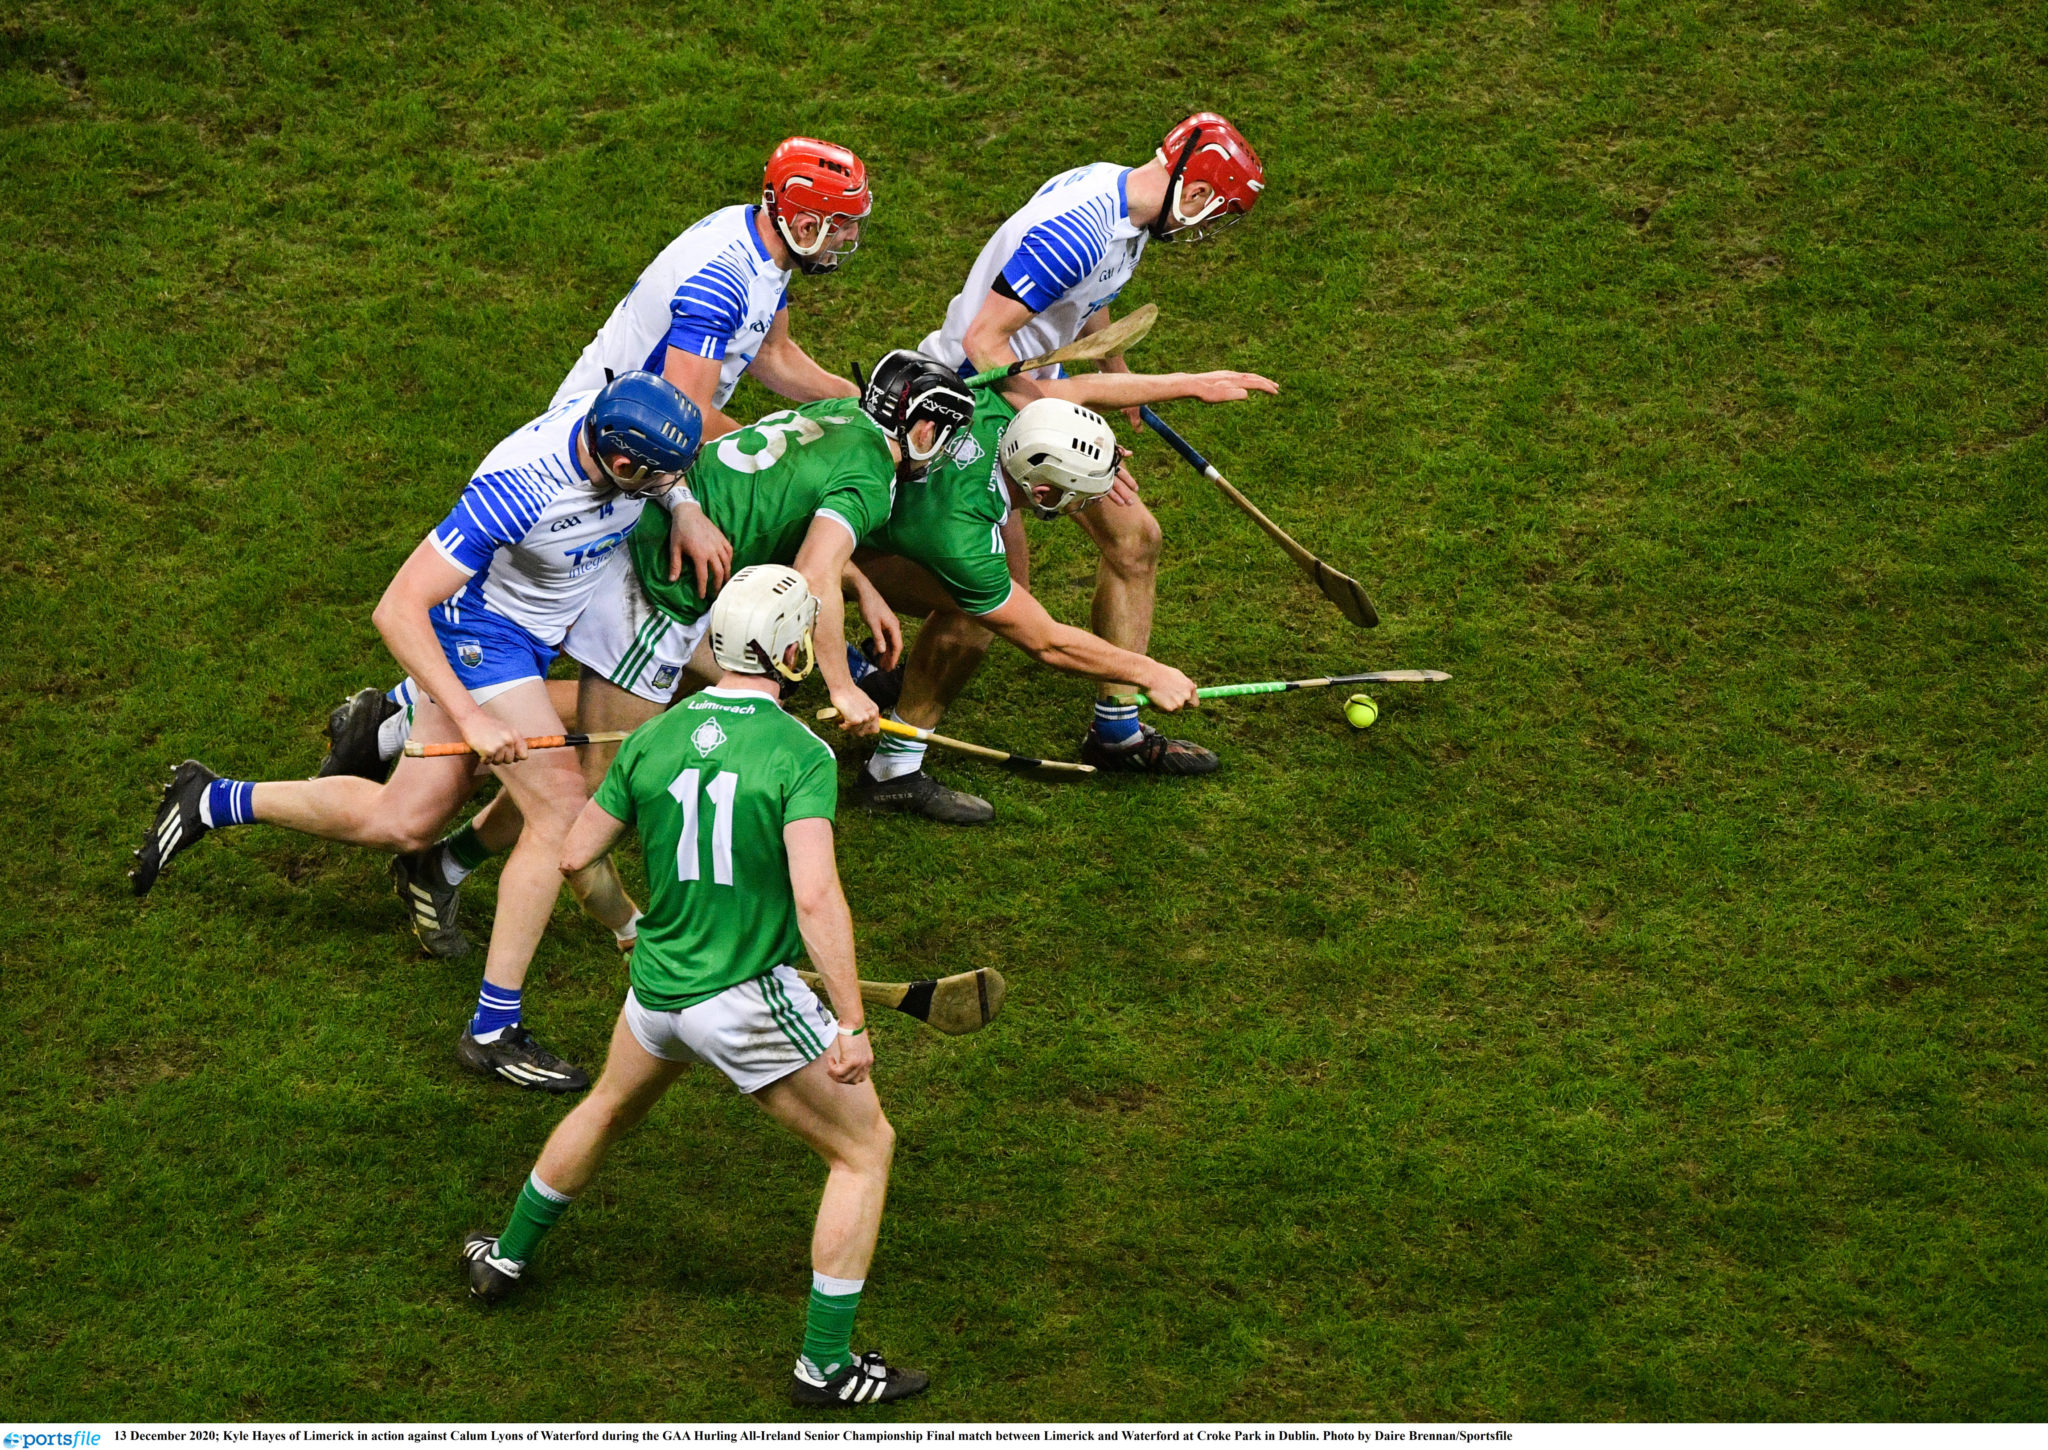 Limerick players battle with Waterford players